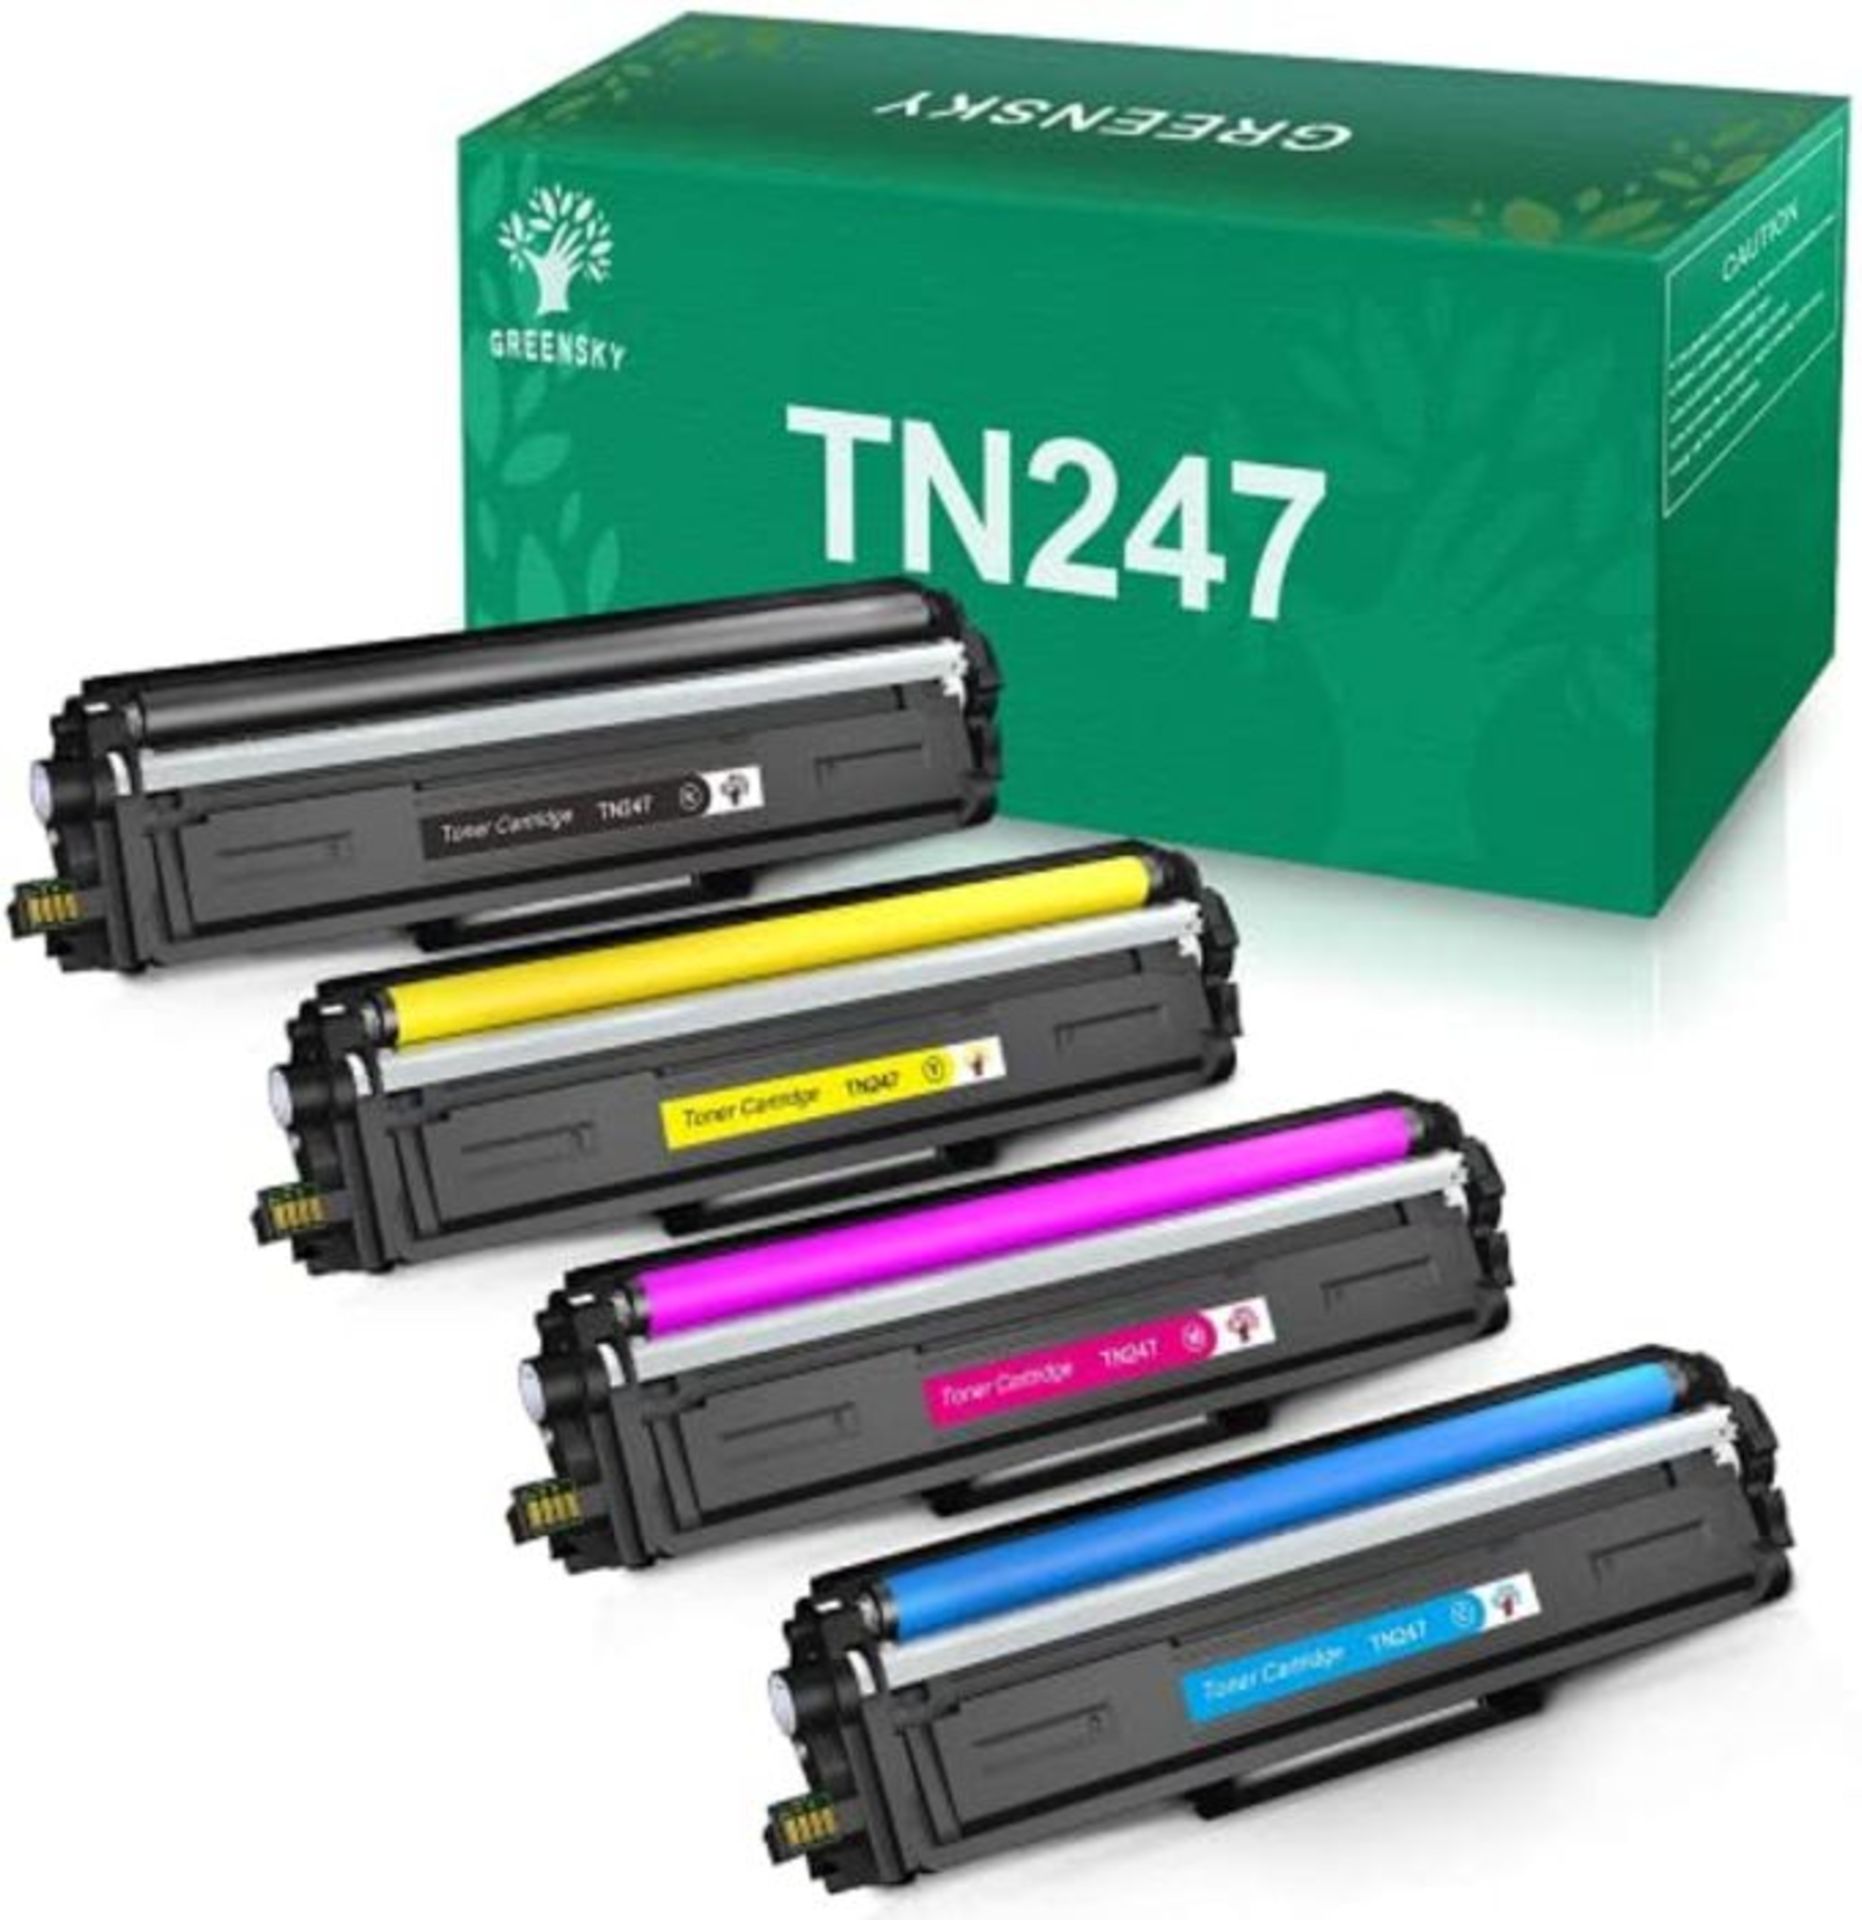 GREENSKY Compatible Toner Cartridges Replacement for Brother TN247 TN243 for MFC-L3710